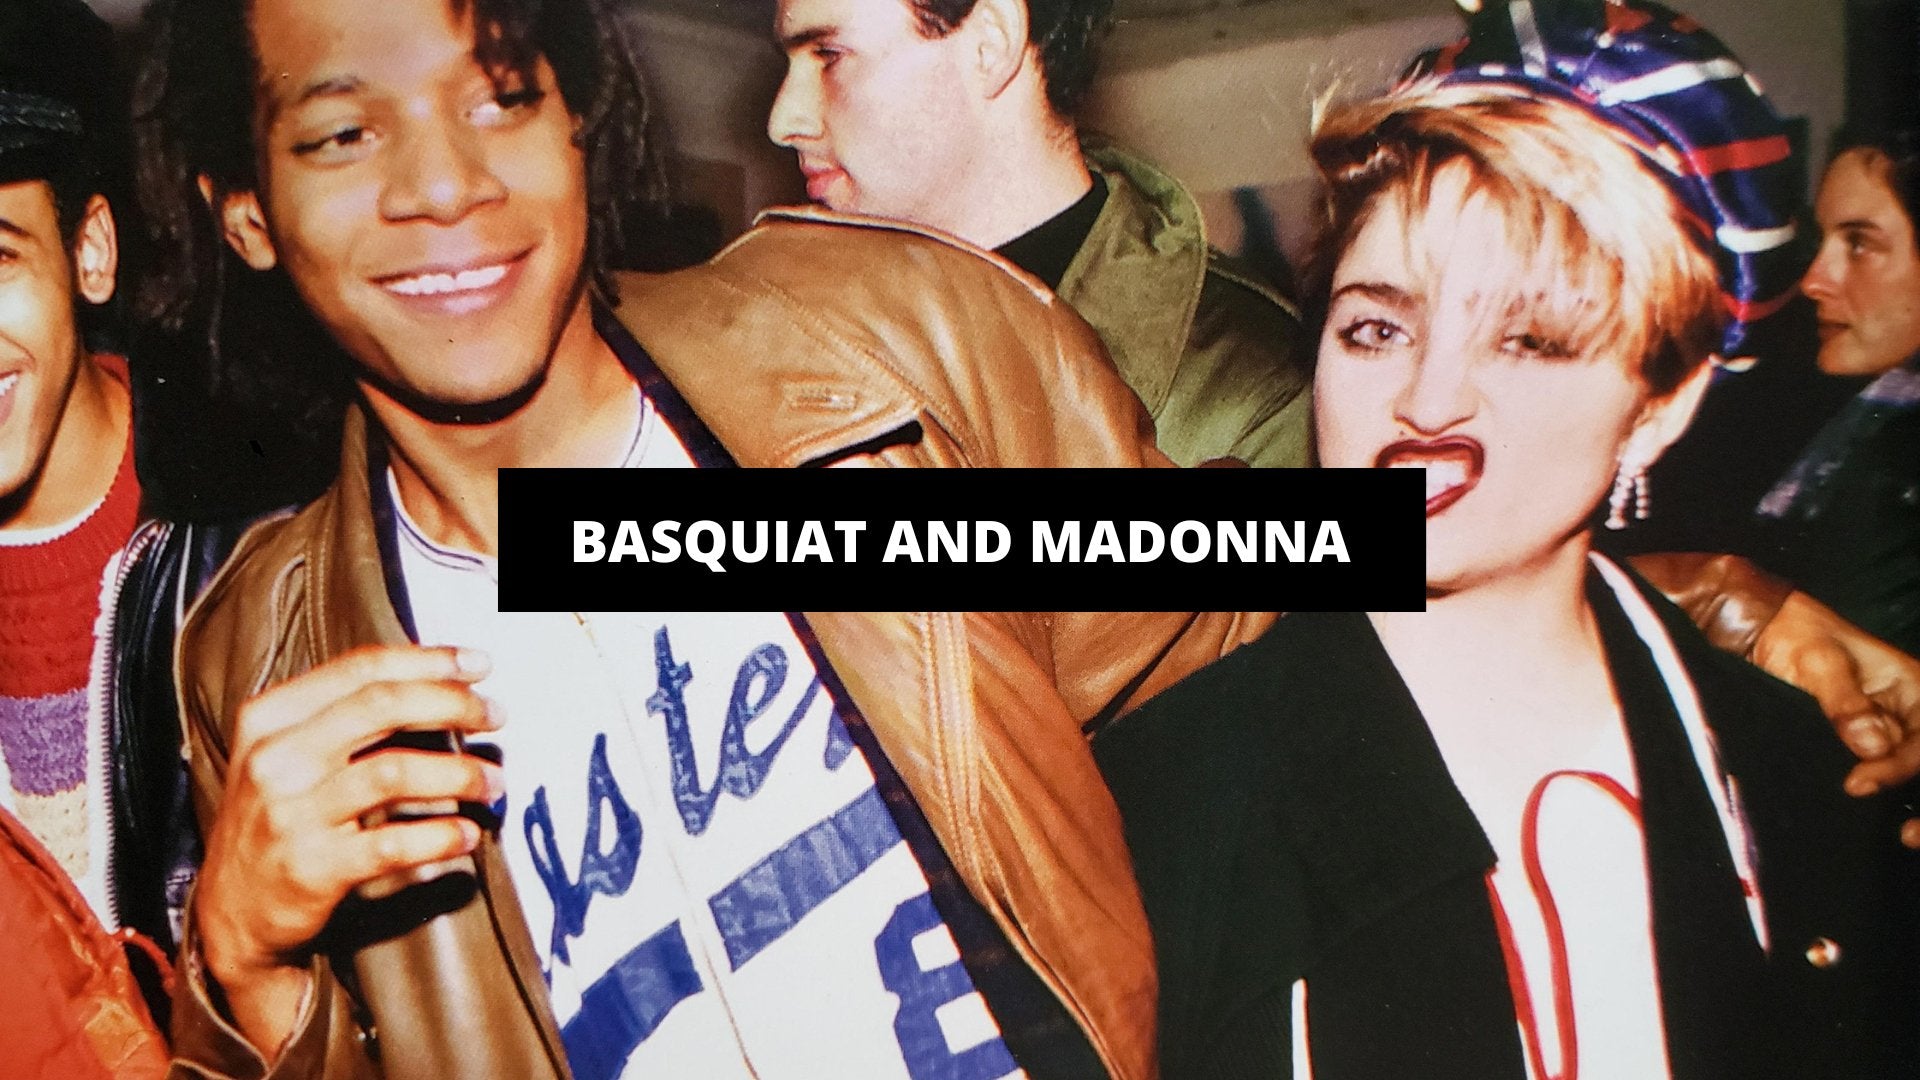 Basquiat and Madonna - The Trendy Art